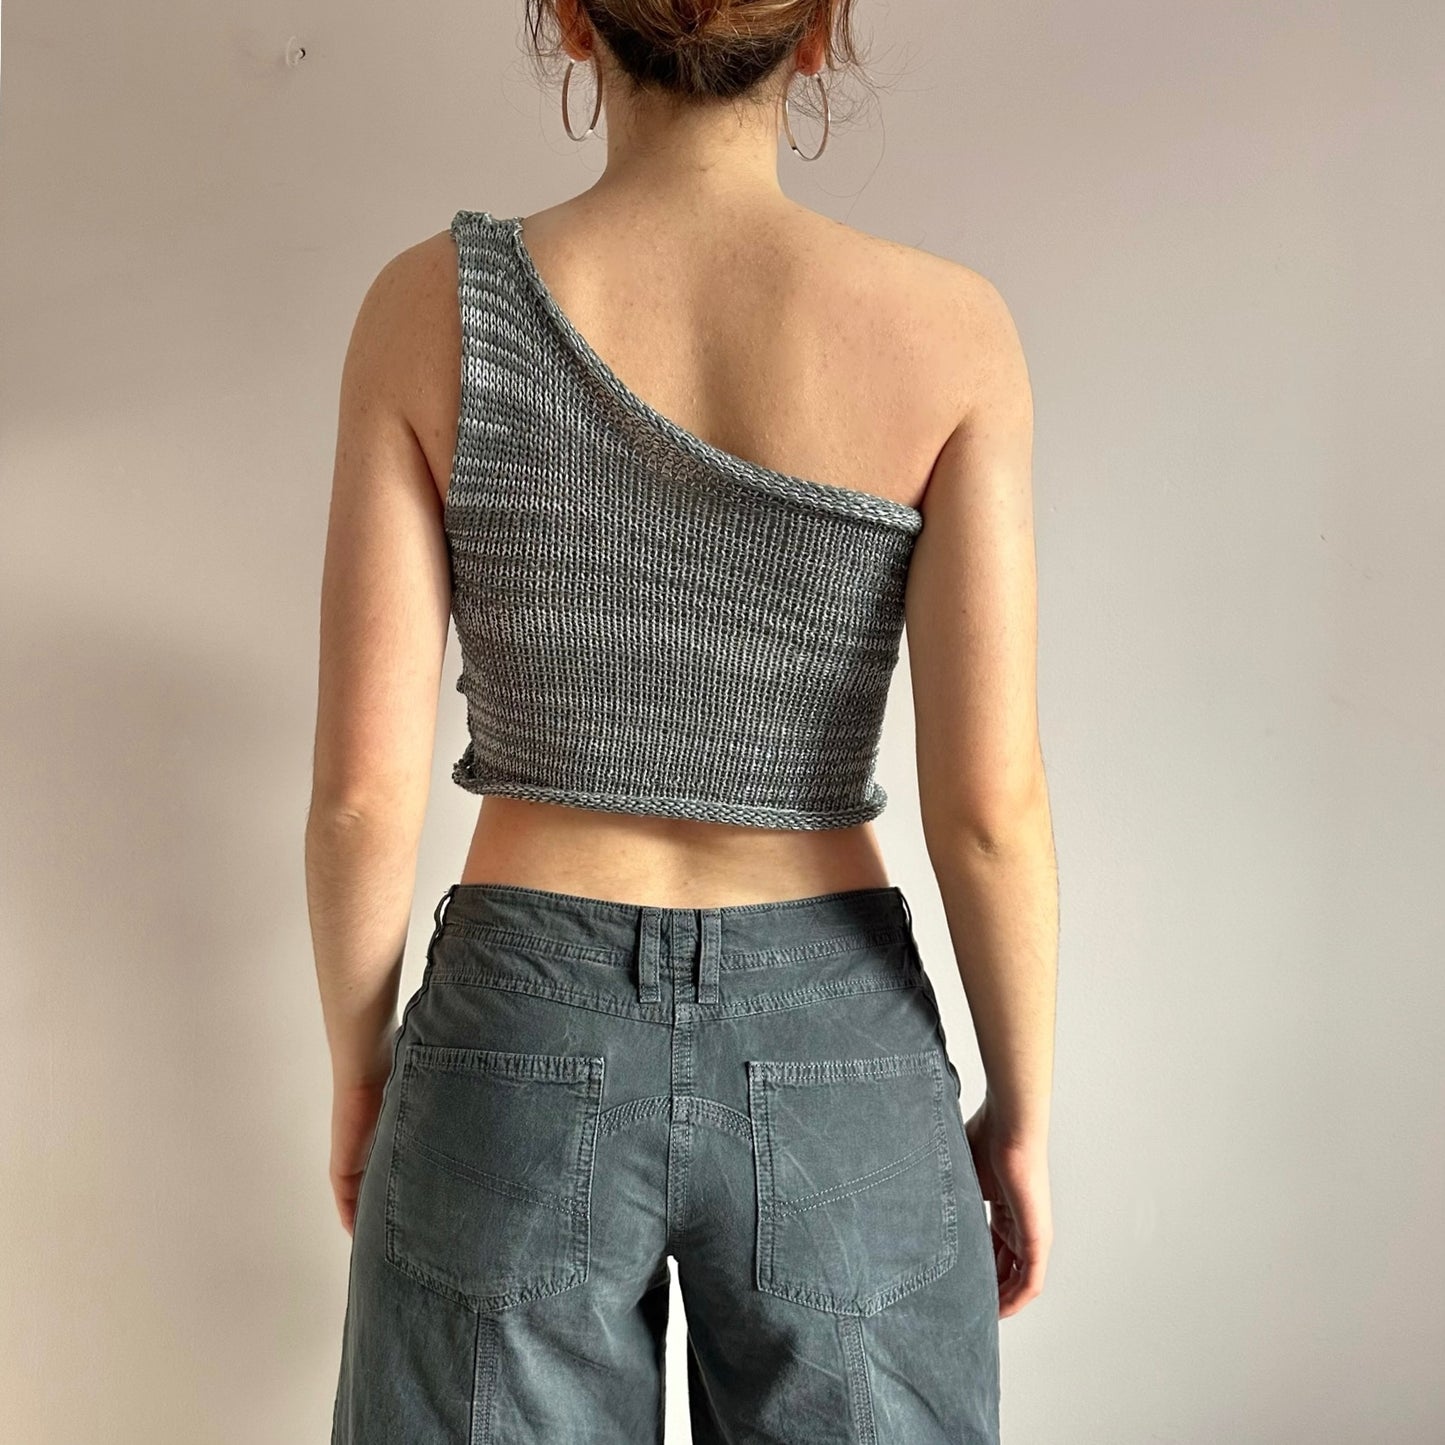 Handmade knitted metallic asymmetrical one shoulder top in silver and grey